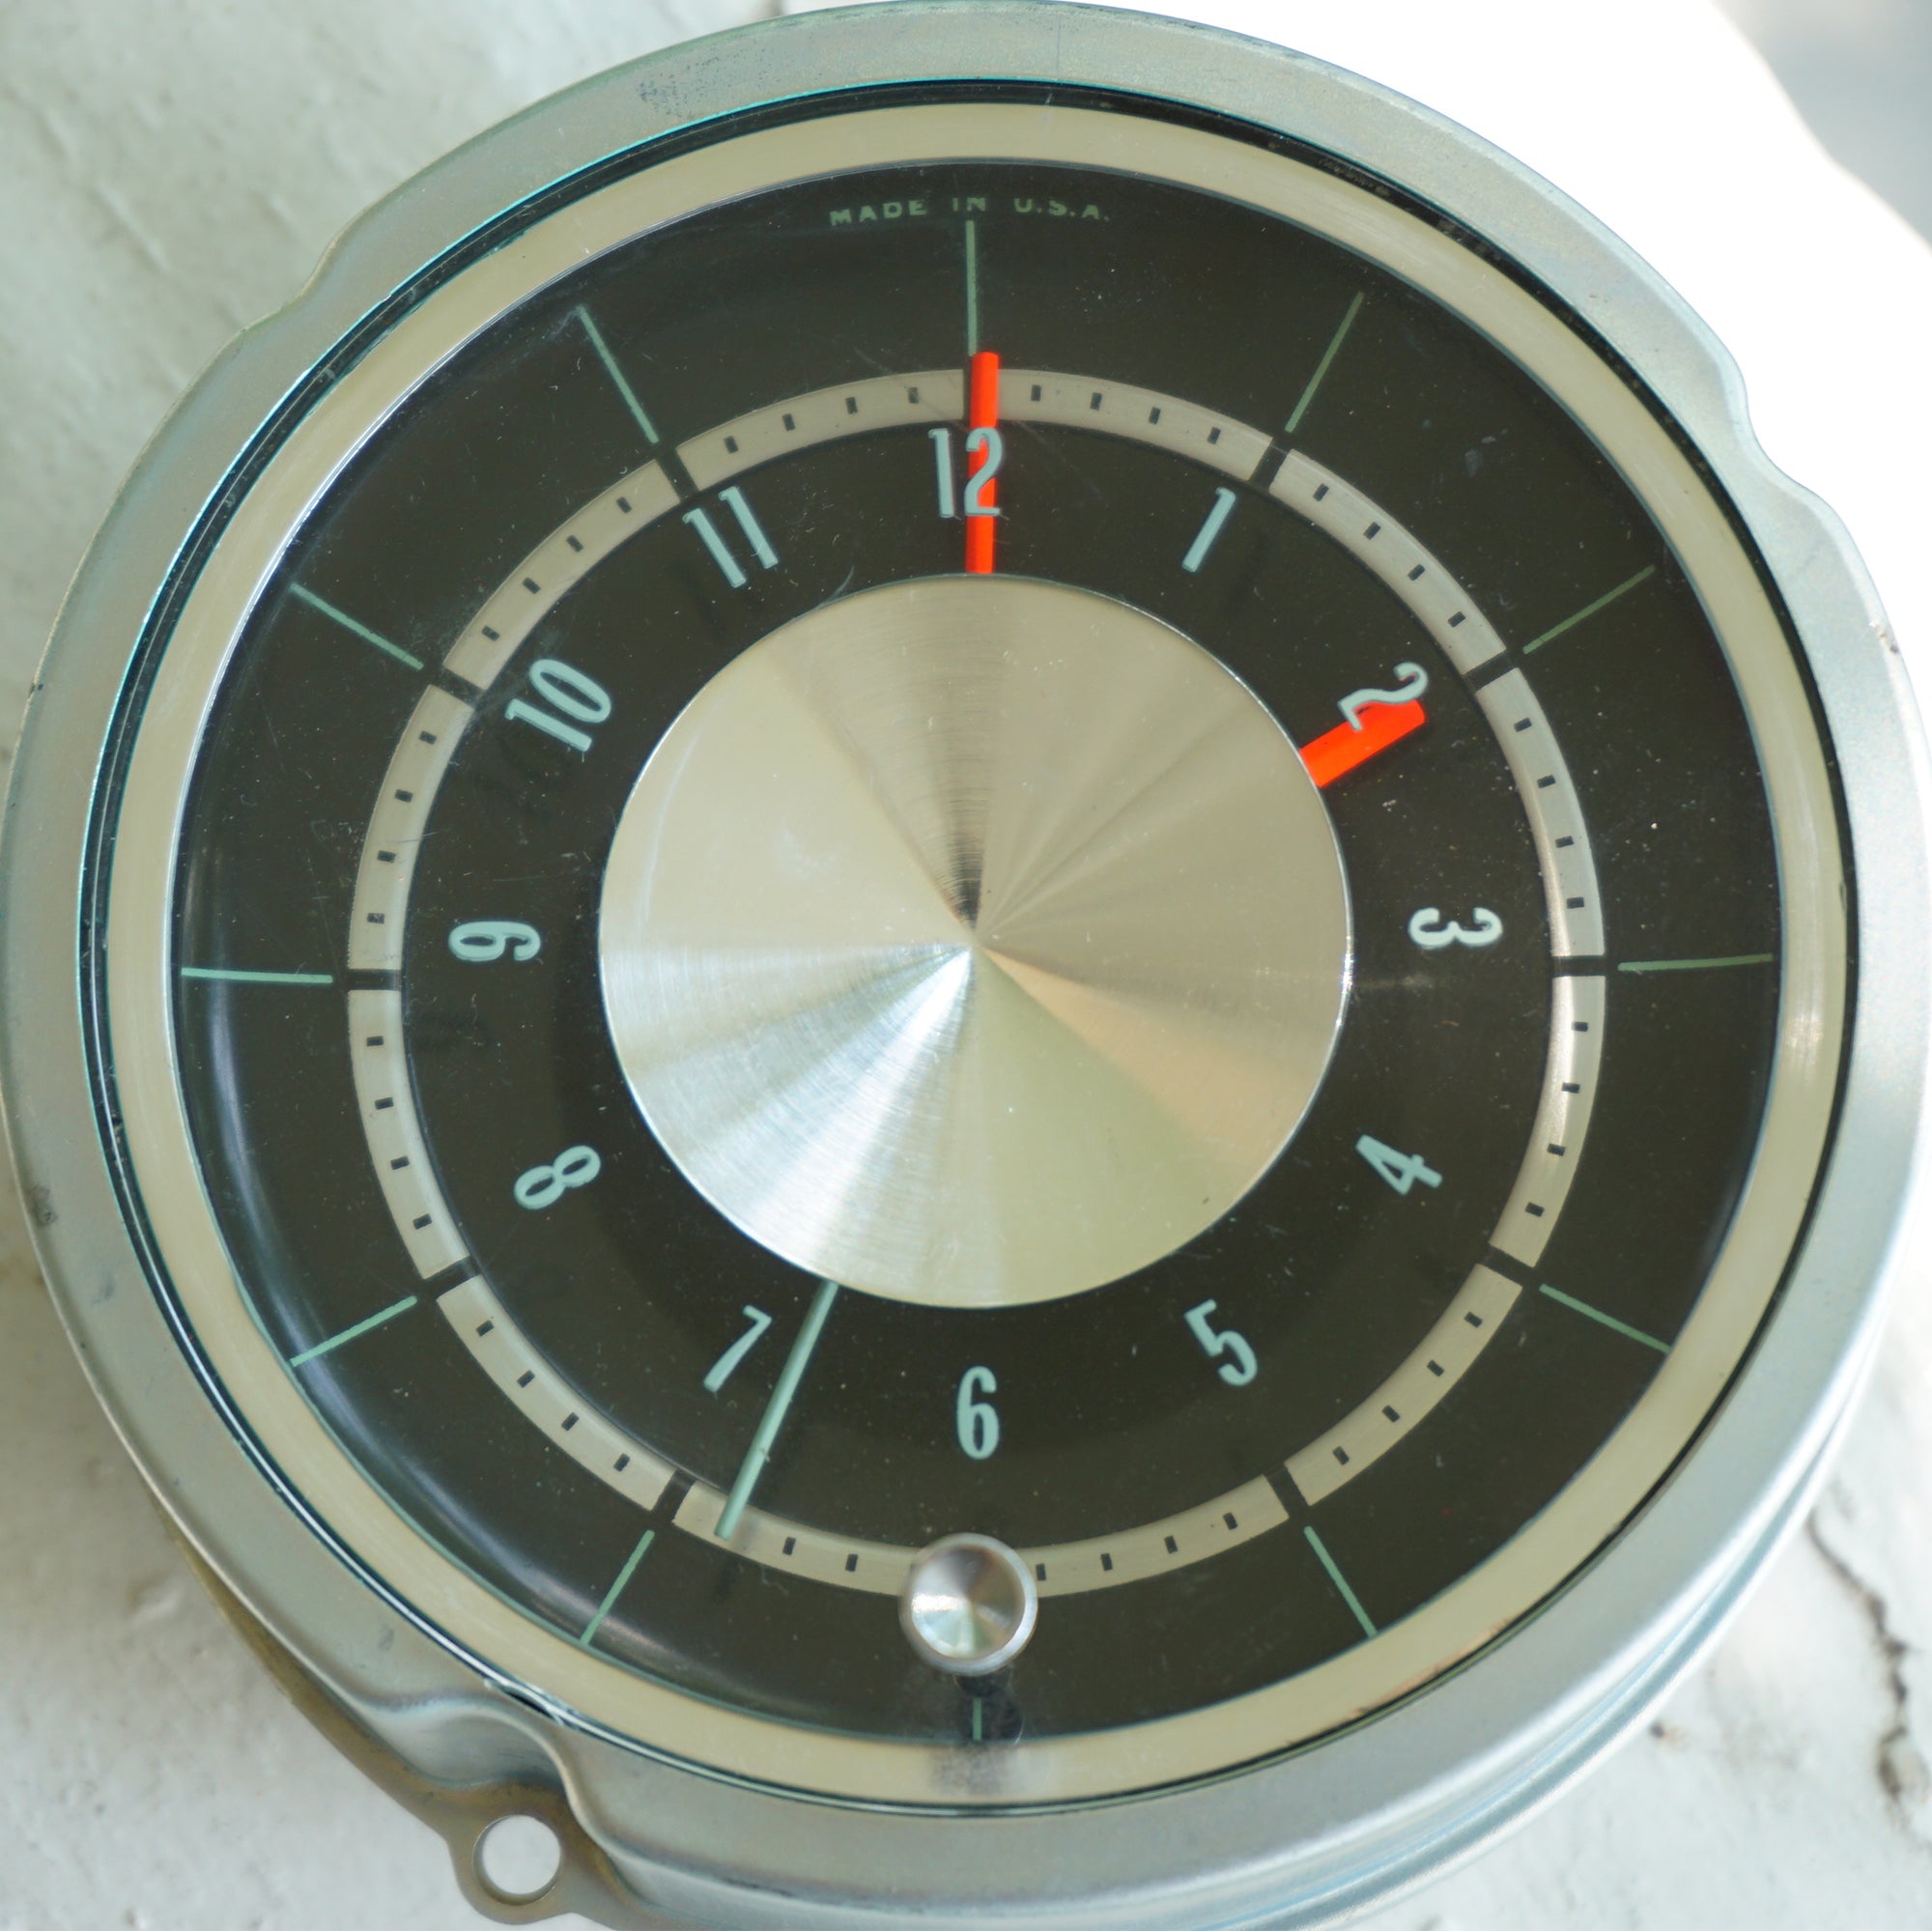 1964 Vintage WESTCLOX Chevy Impala In-Dash Clock. Stamped: A SEP 17 64. Made in U.S.A.